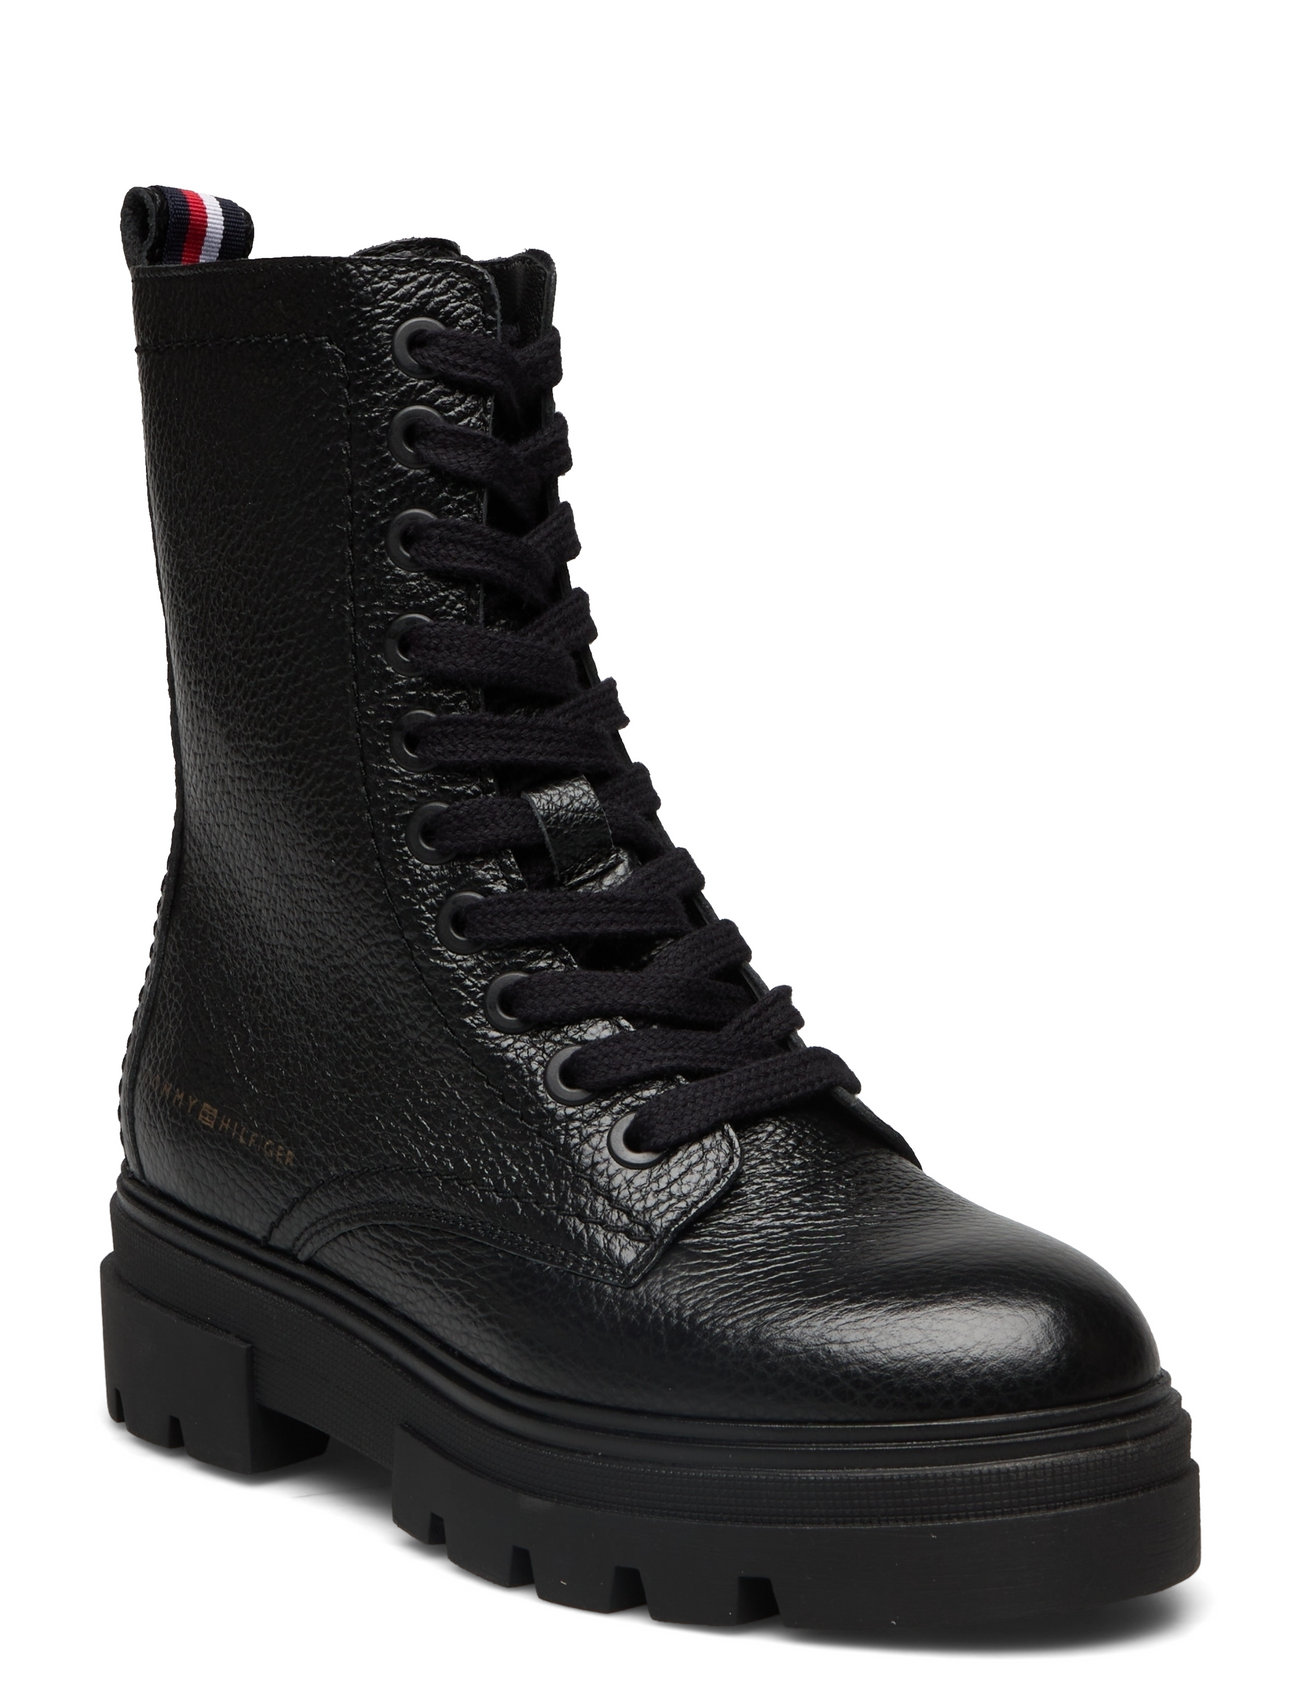 Monochromatic Lace Up Boot Shoes Boots Ankle Boots Laced Boots Black Tommy Hilfiger